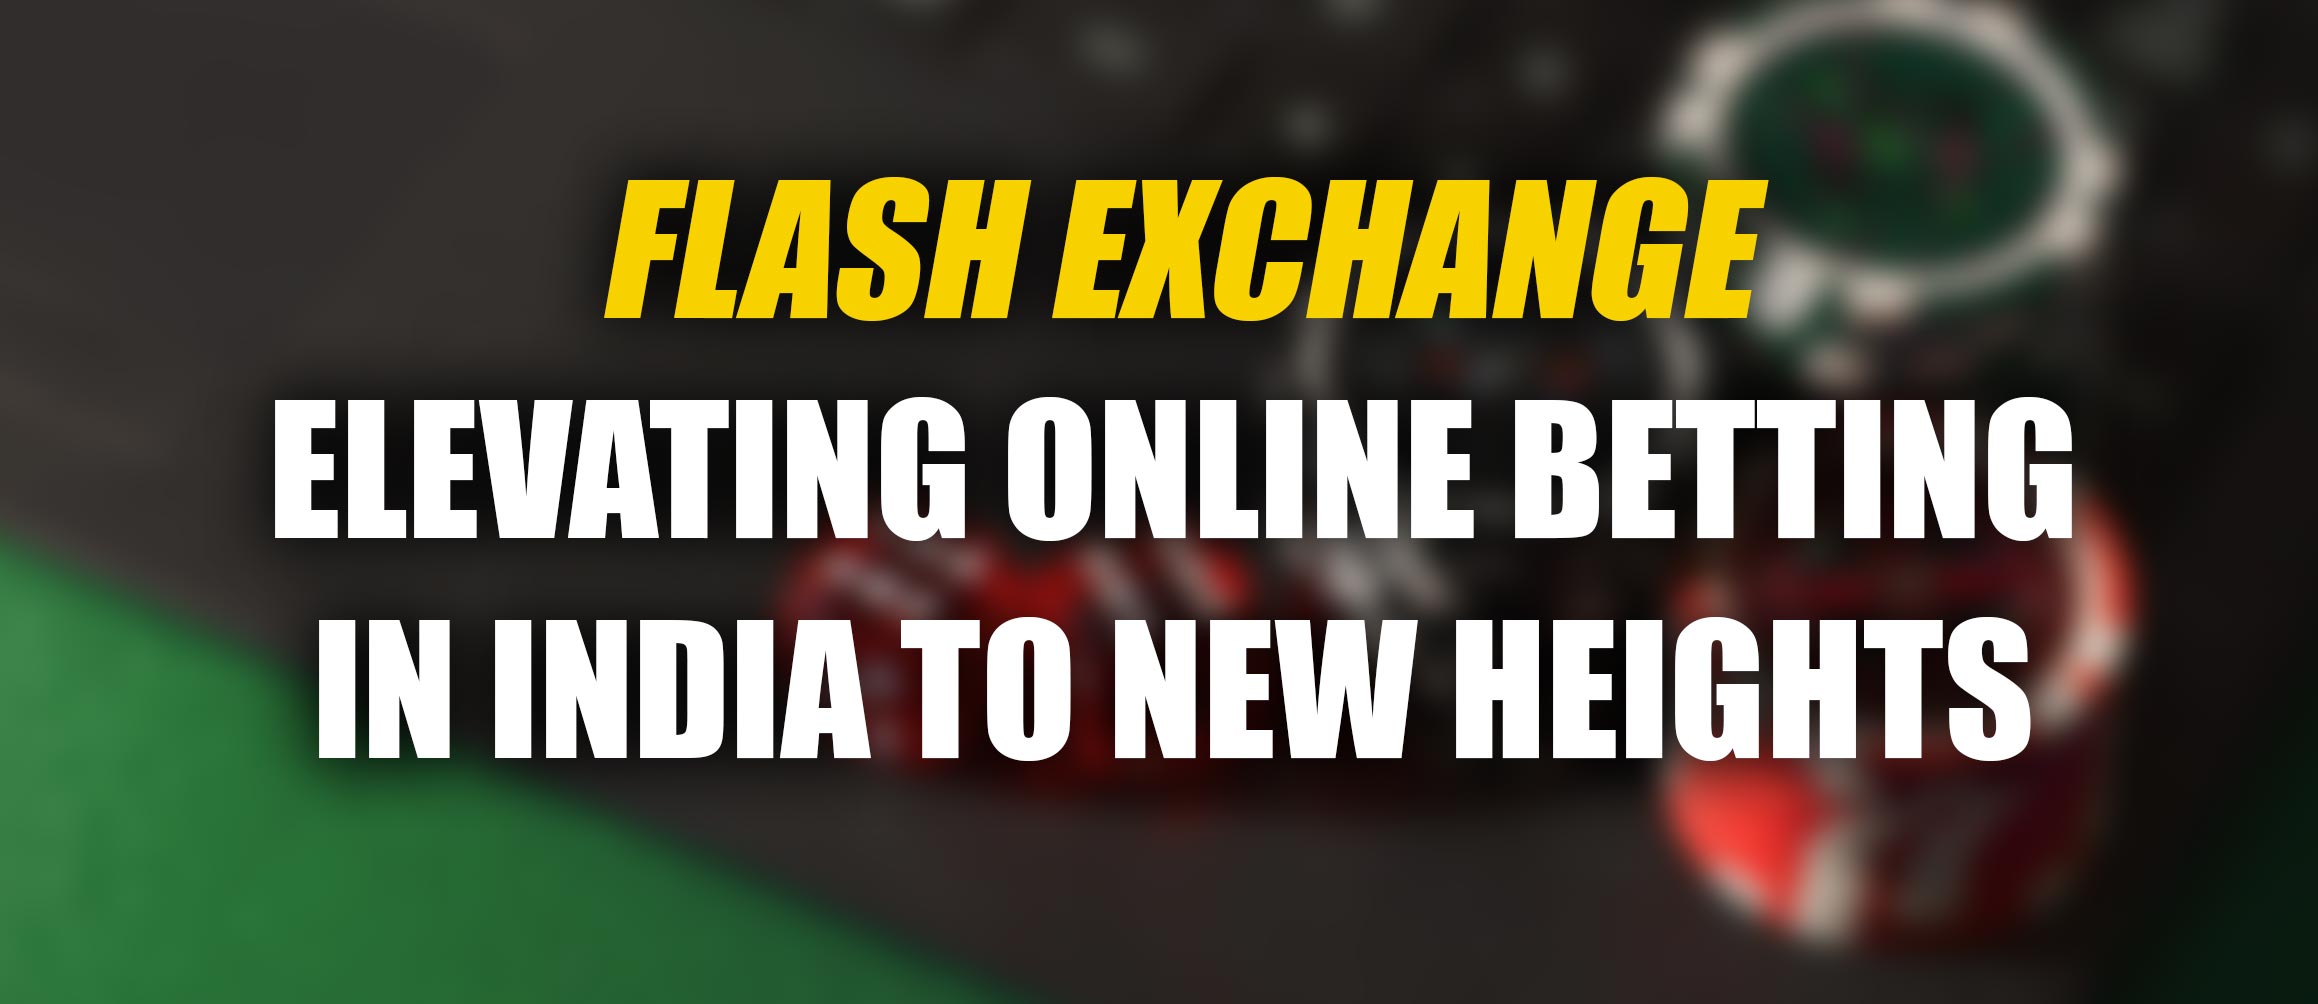 Flash Exchange: Elevating Online Betting in India to New Heights